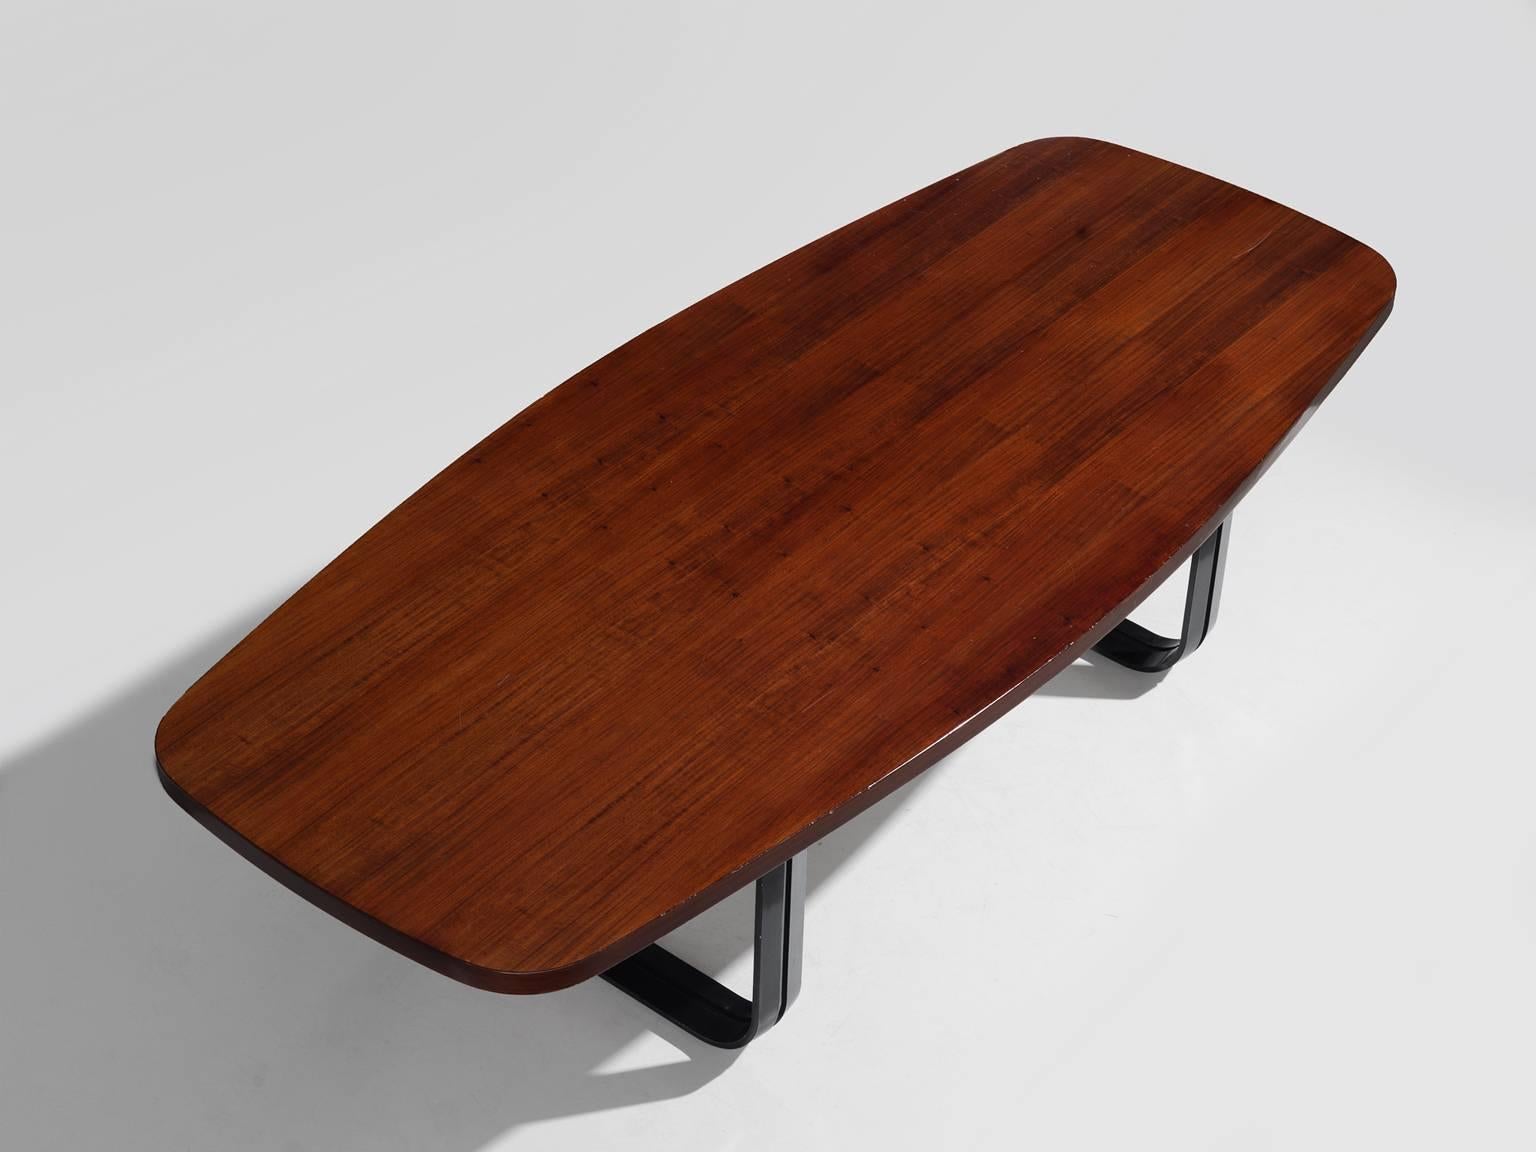 MIM Roma, conference table in walnut and black metal, Italy, 1960s.

Luxurious boat shaped table with a walnut top. The walnut veneer shows a nice patina and has a clear shape. The rounded corners and smooth edges give the table an elegant